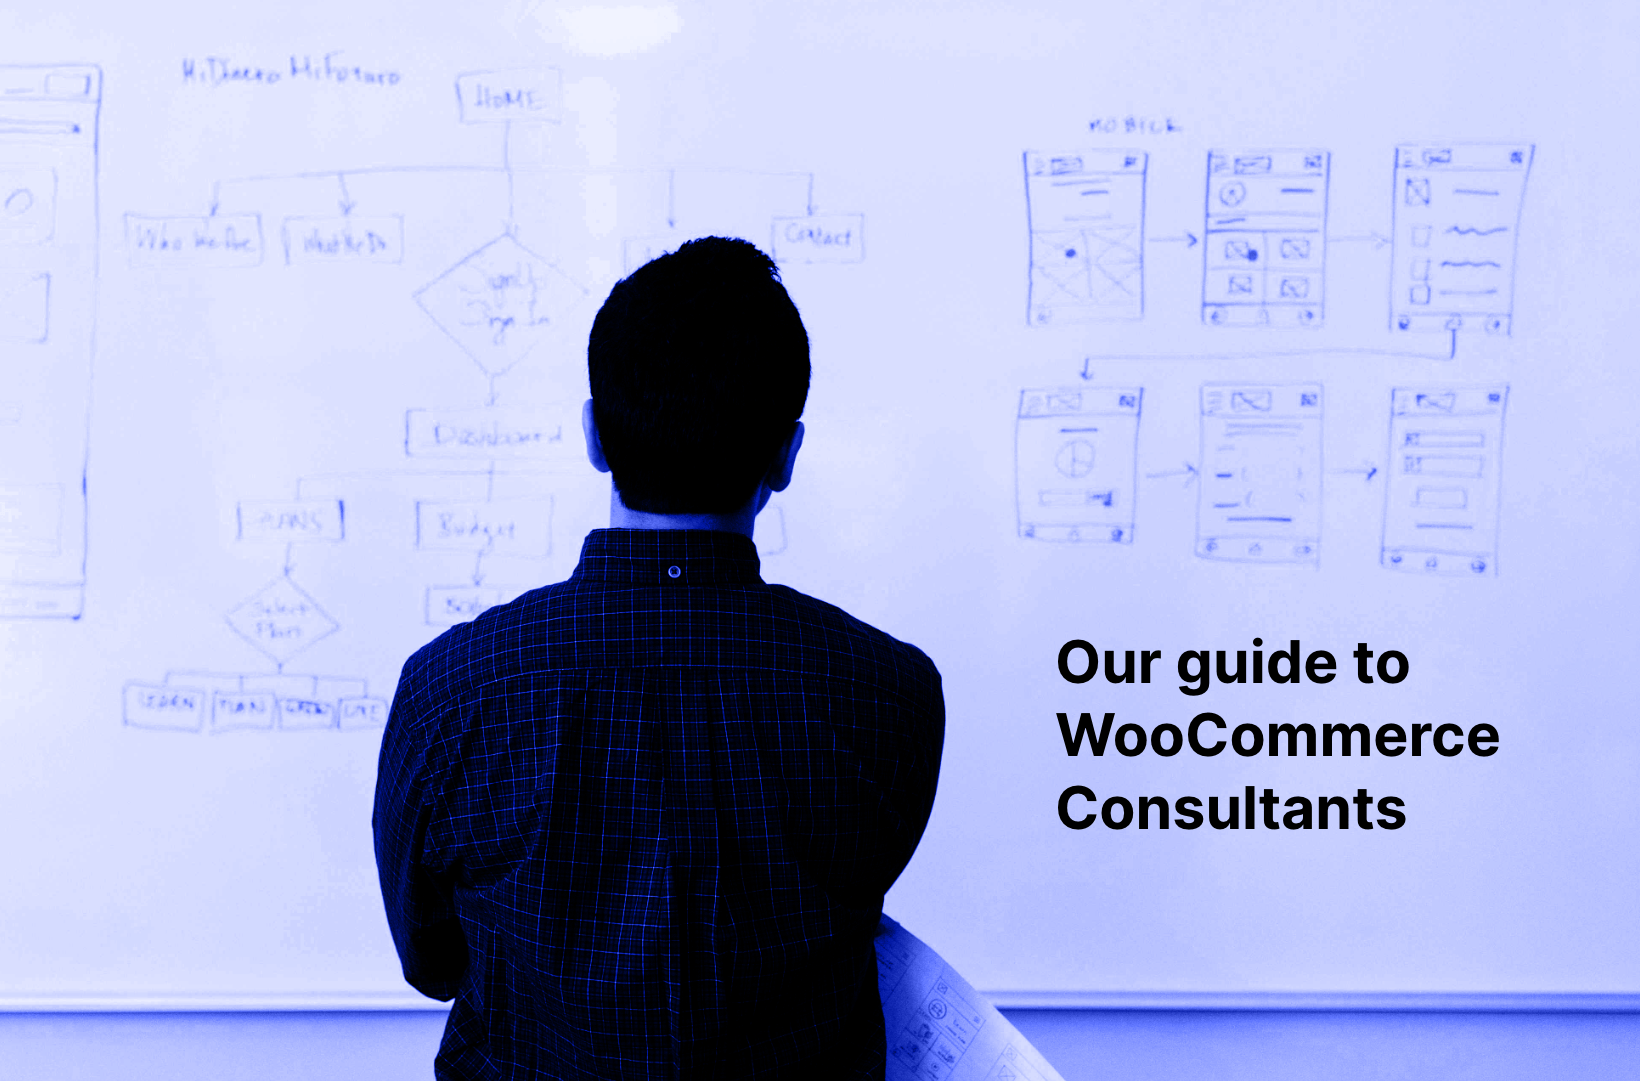 Our guide to WooCommerce Consultants